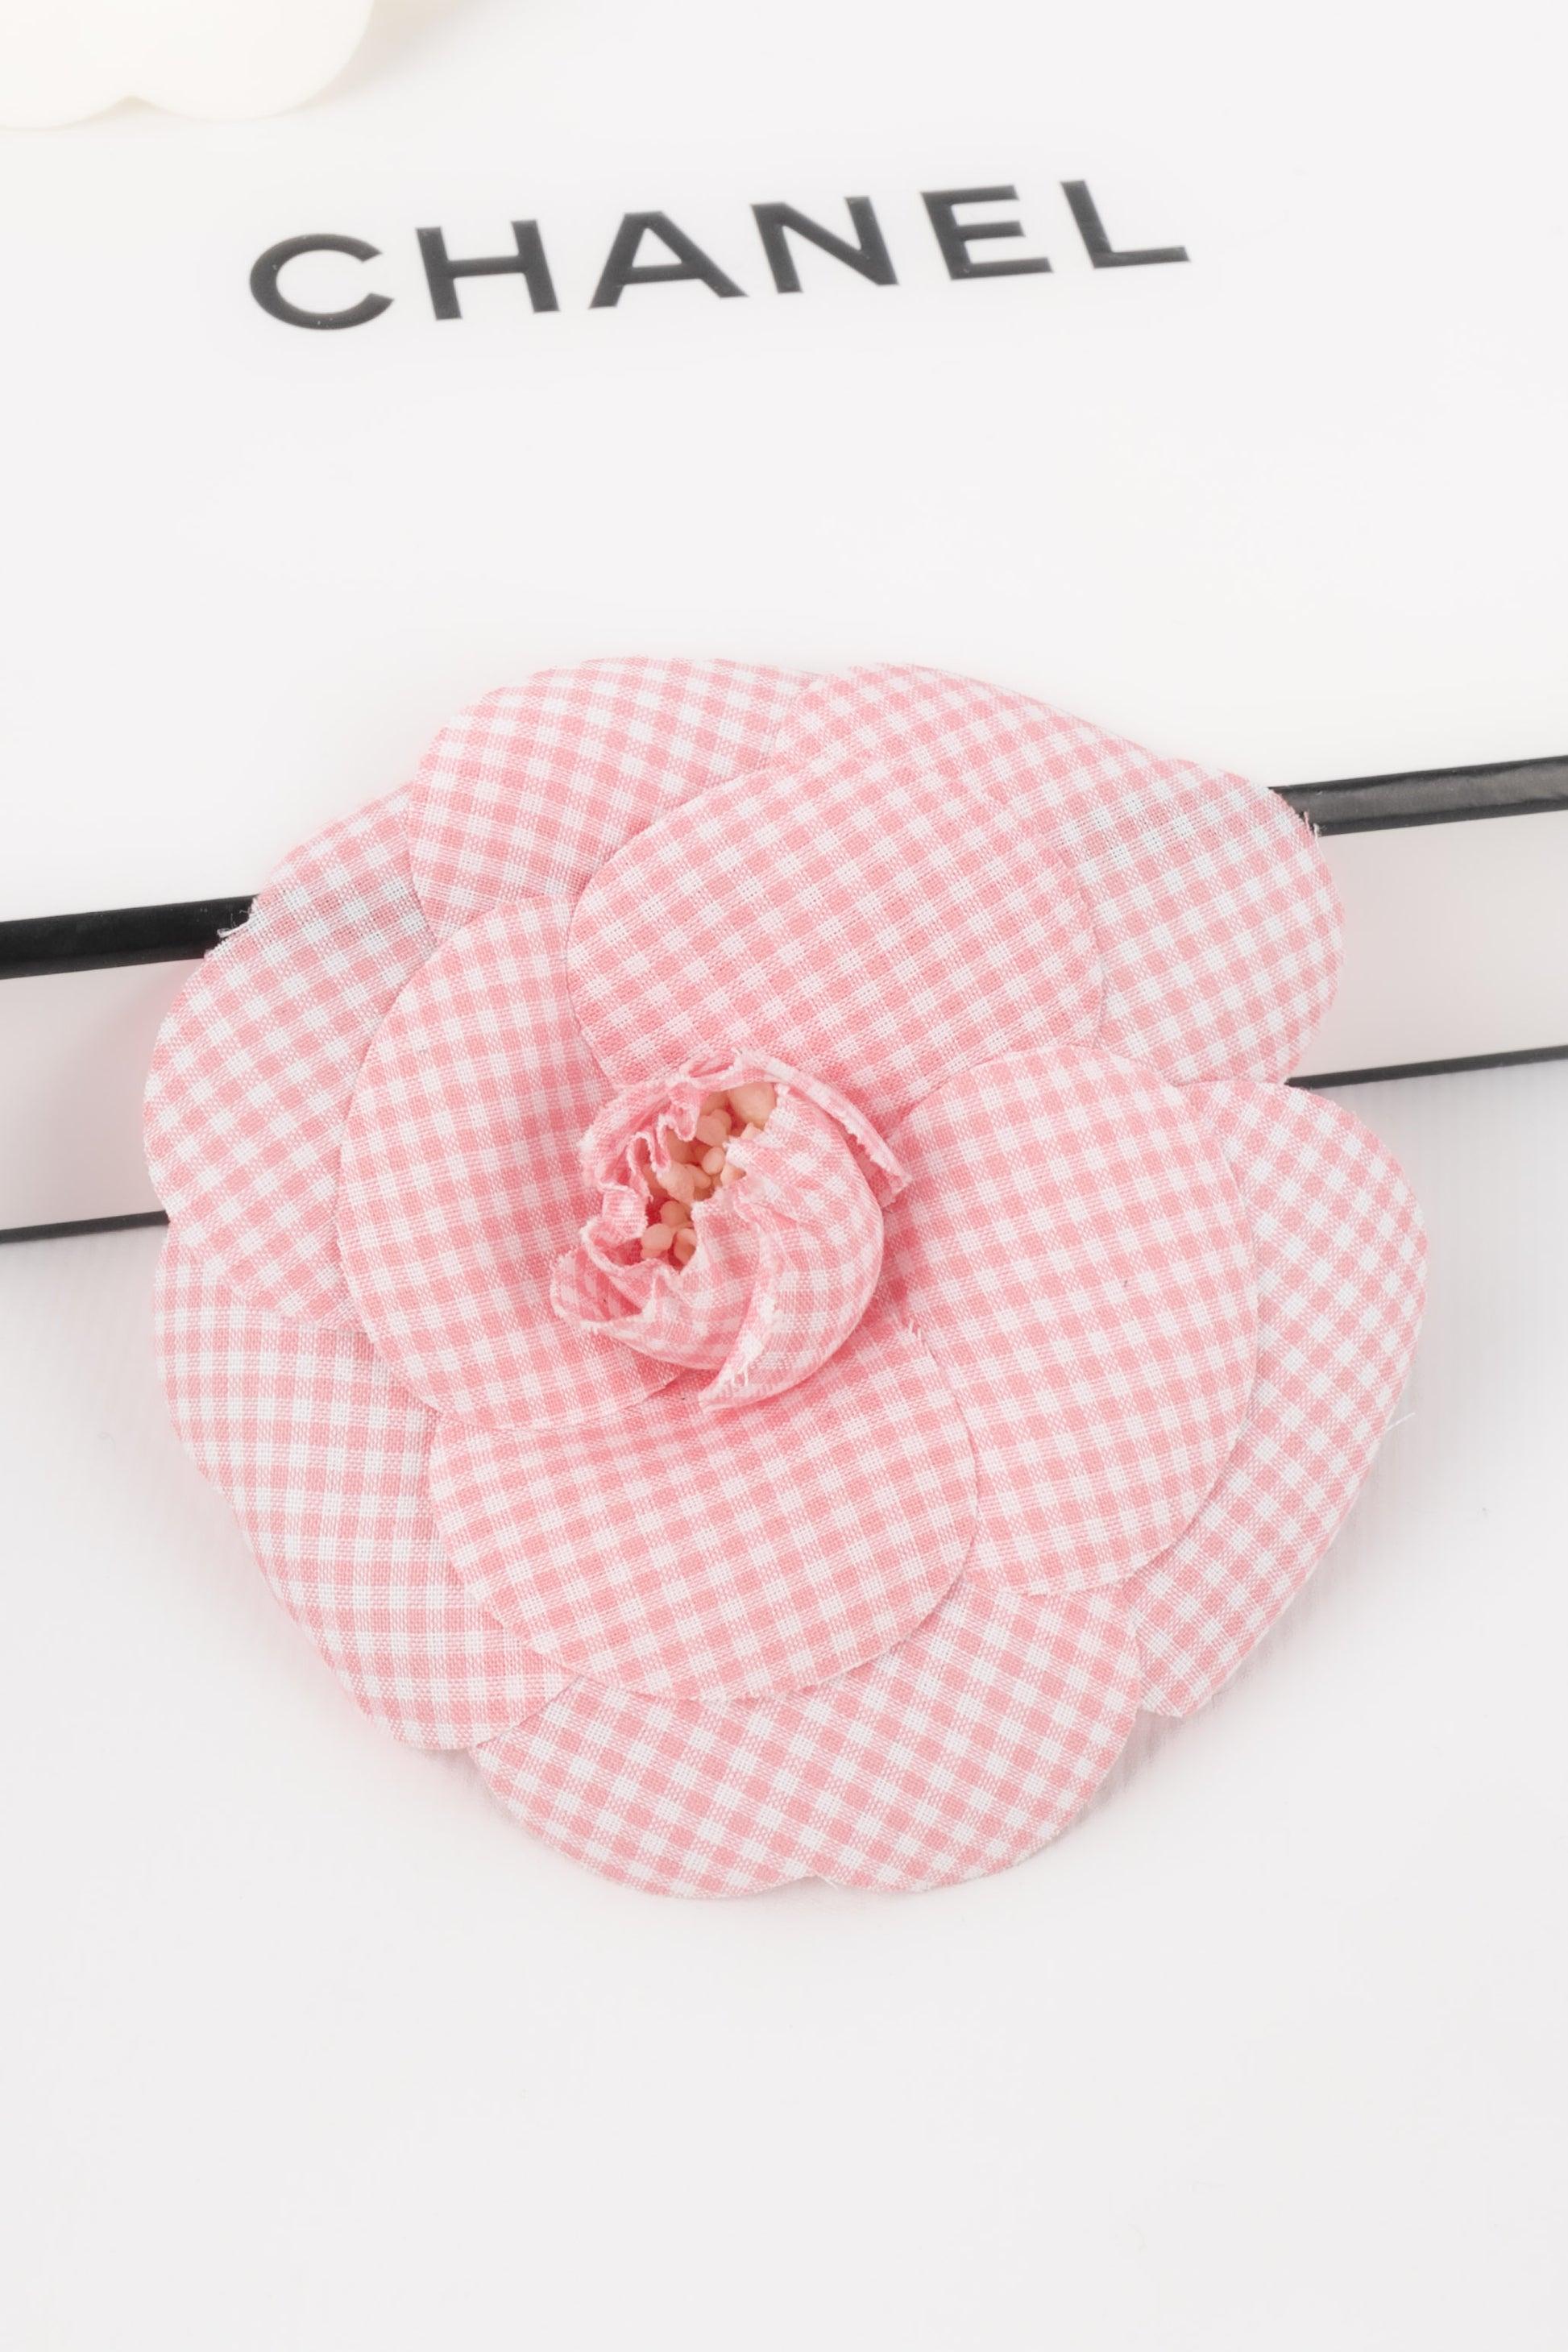 Chanel Camellia Brooch Made of Pink and White Gingham Fabric, 1990s For Sale 1